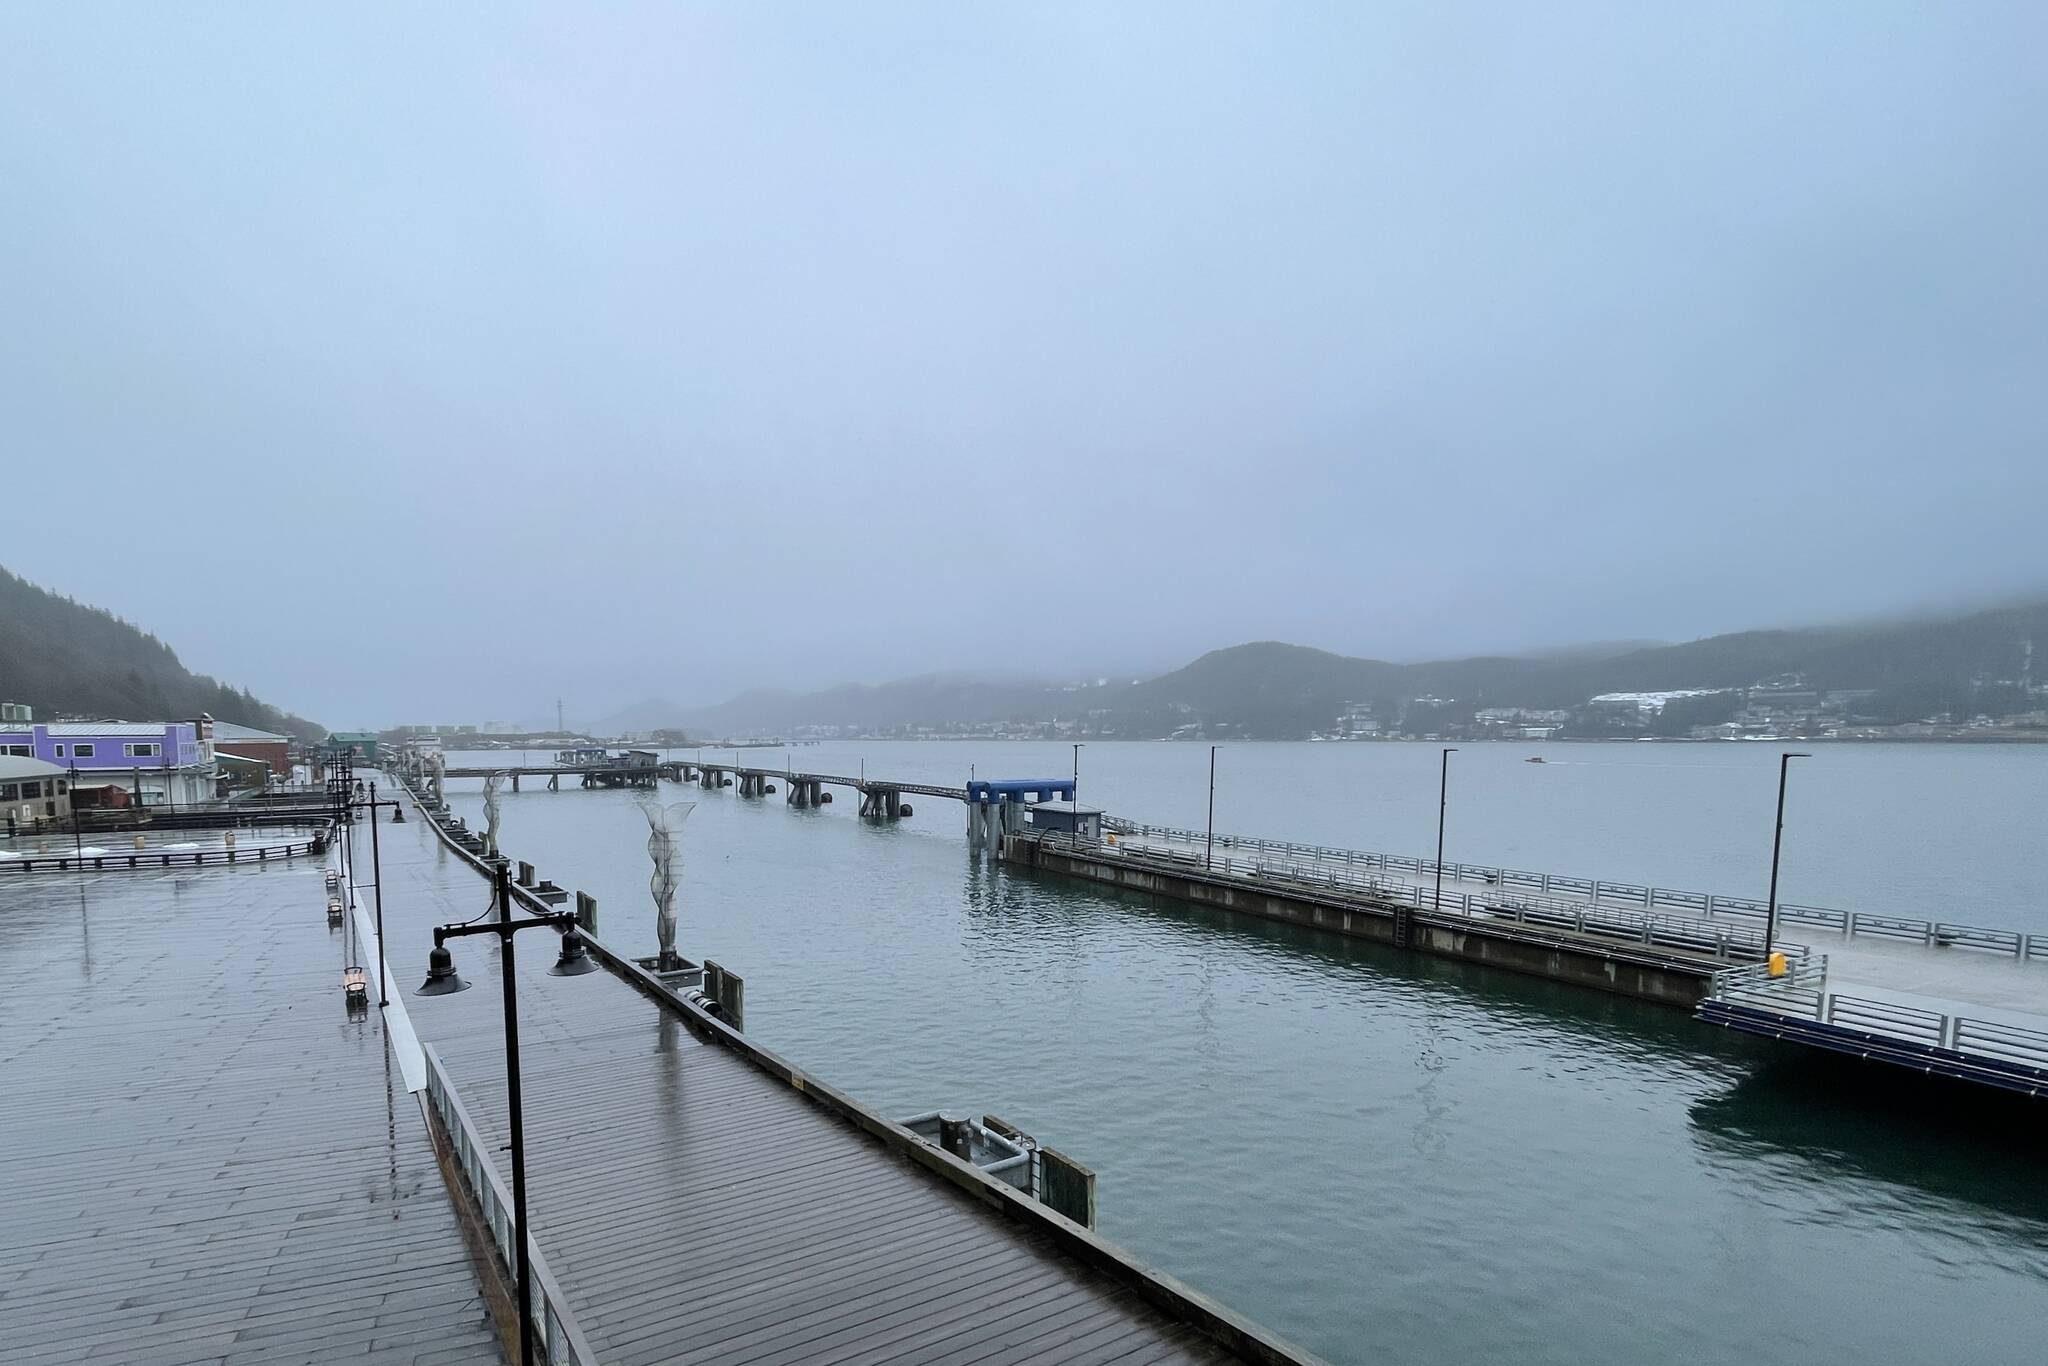 The City and Borough of Juneau Committee of the Whole got an update on the city’s project to electrify two of the cruise piers on Feb. 14, 2022. (Michael S. Lockett / Juneau Empire)